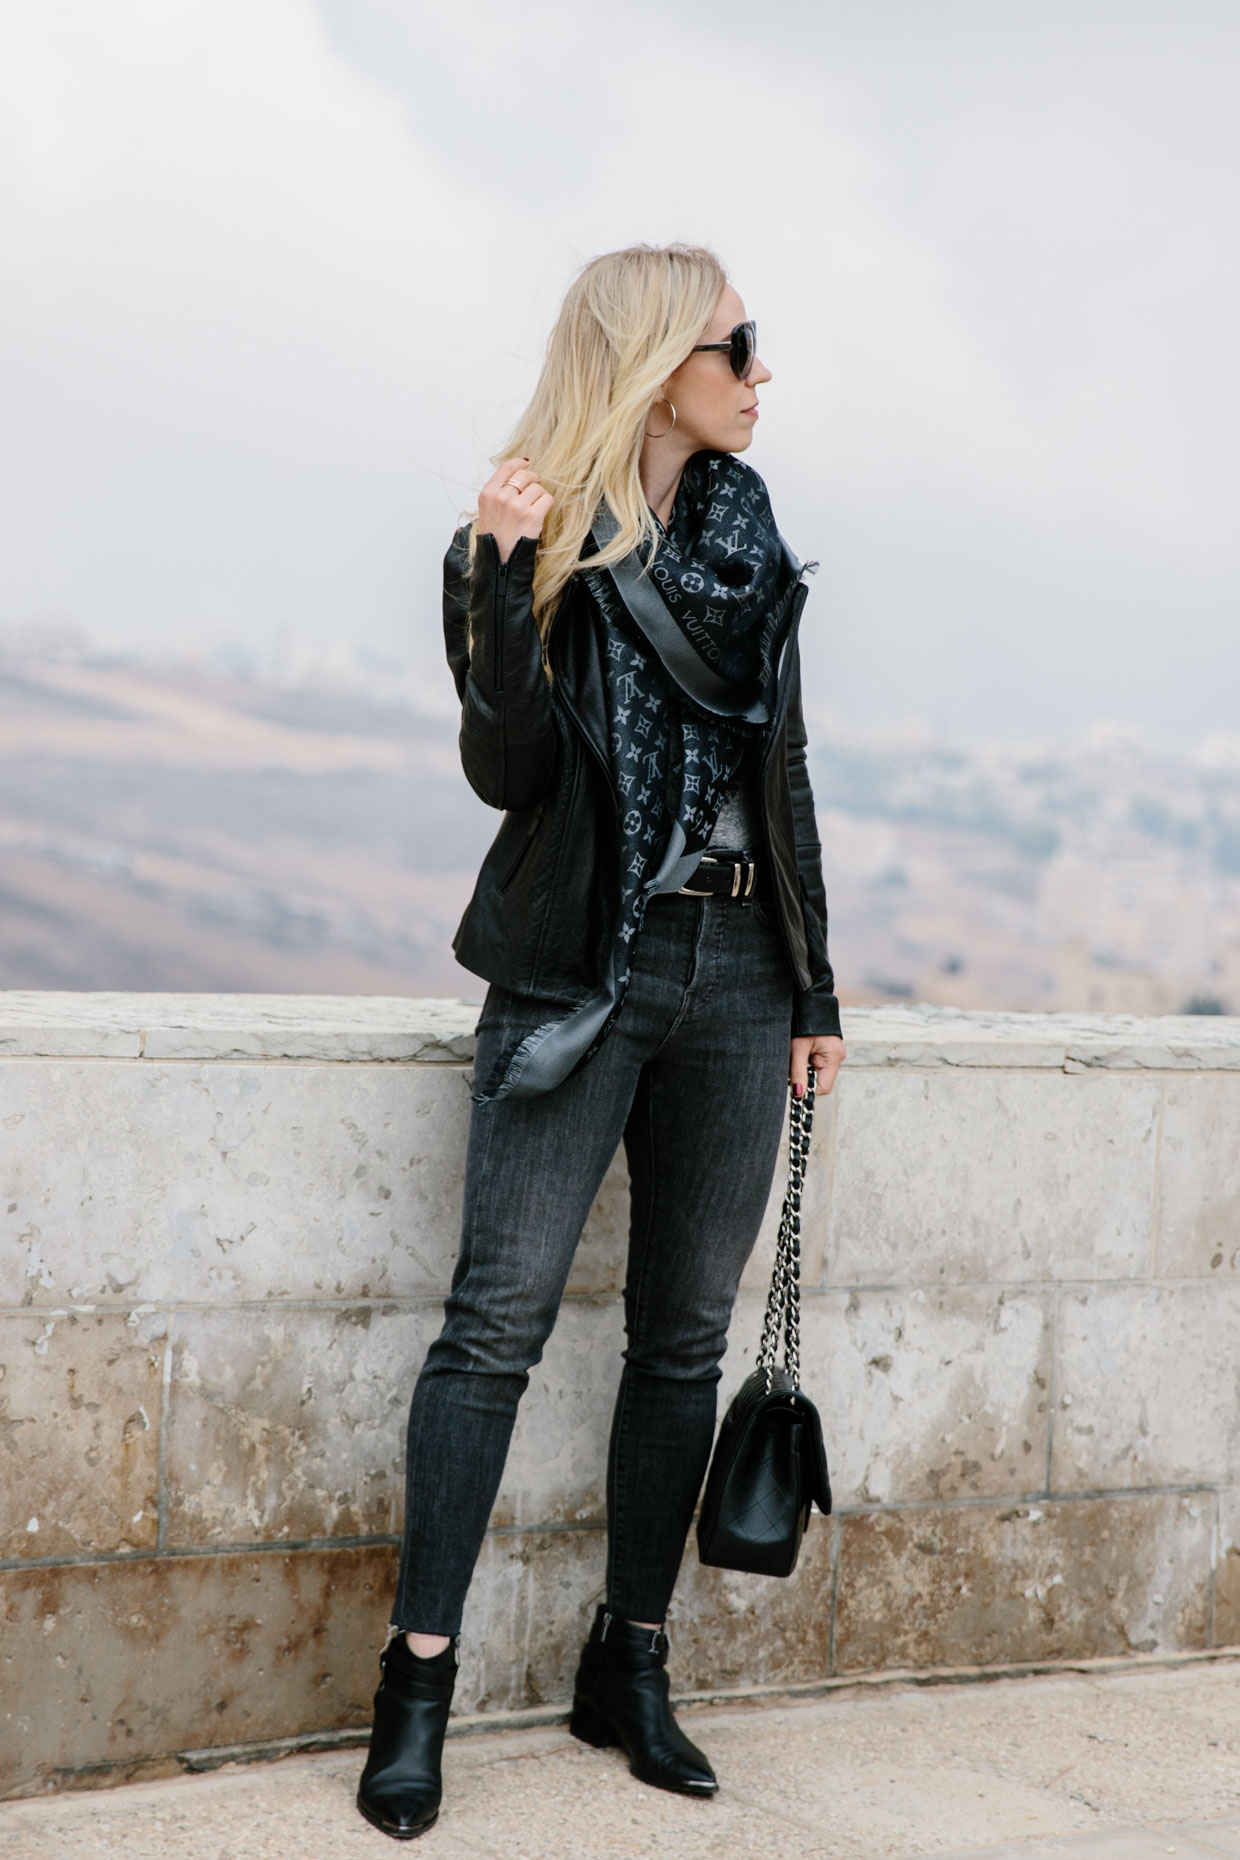 Stormy: Leather Moto Jacket with Louis Vuitton Scarf and Gray